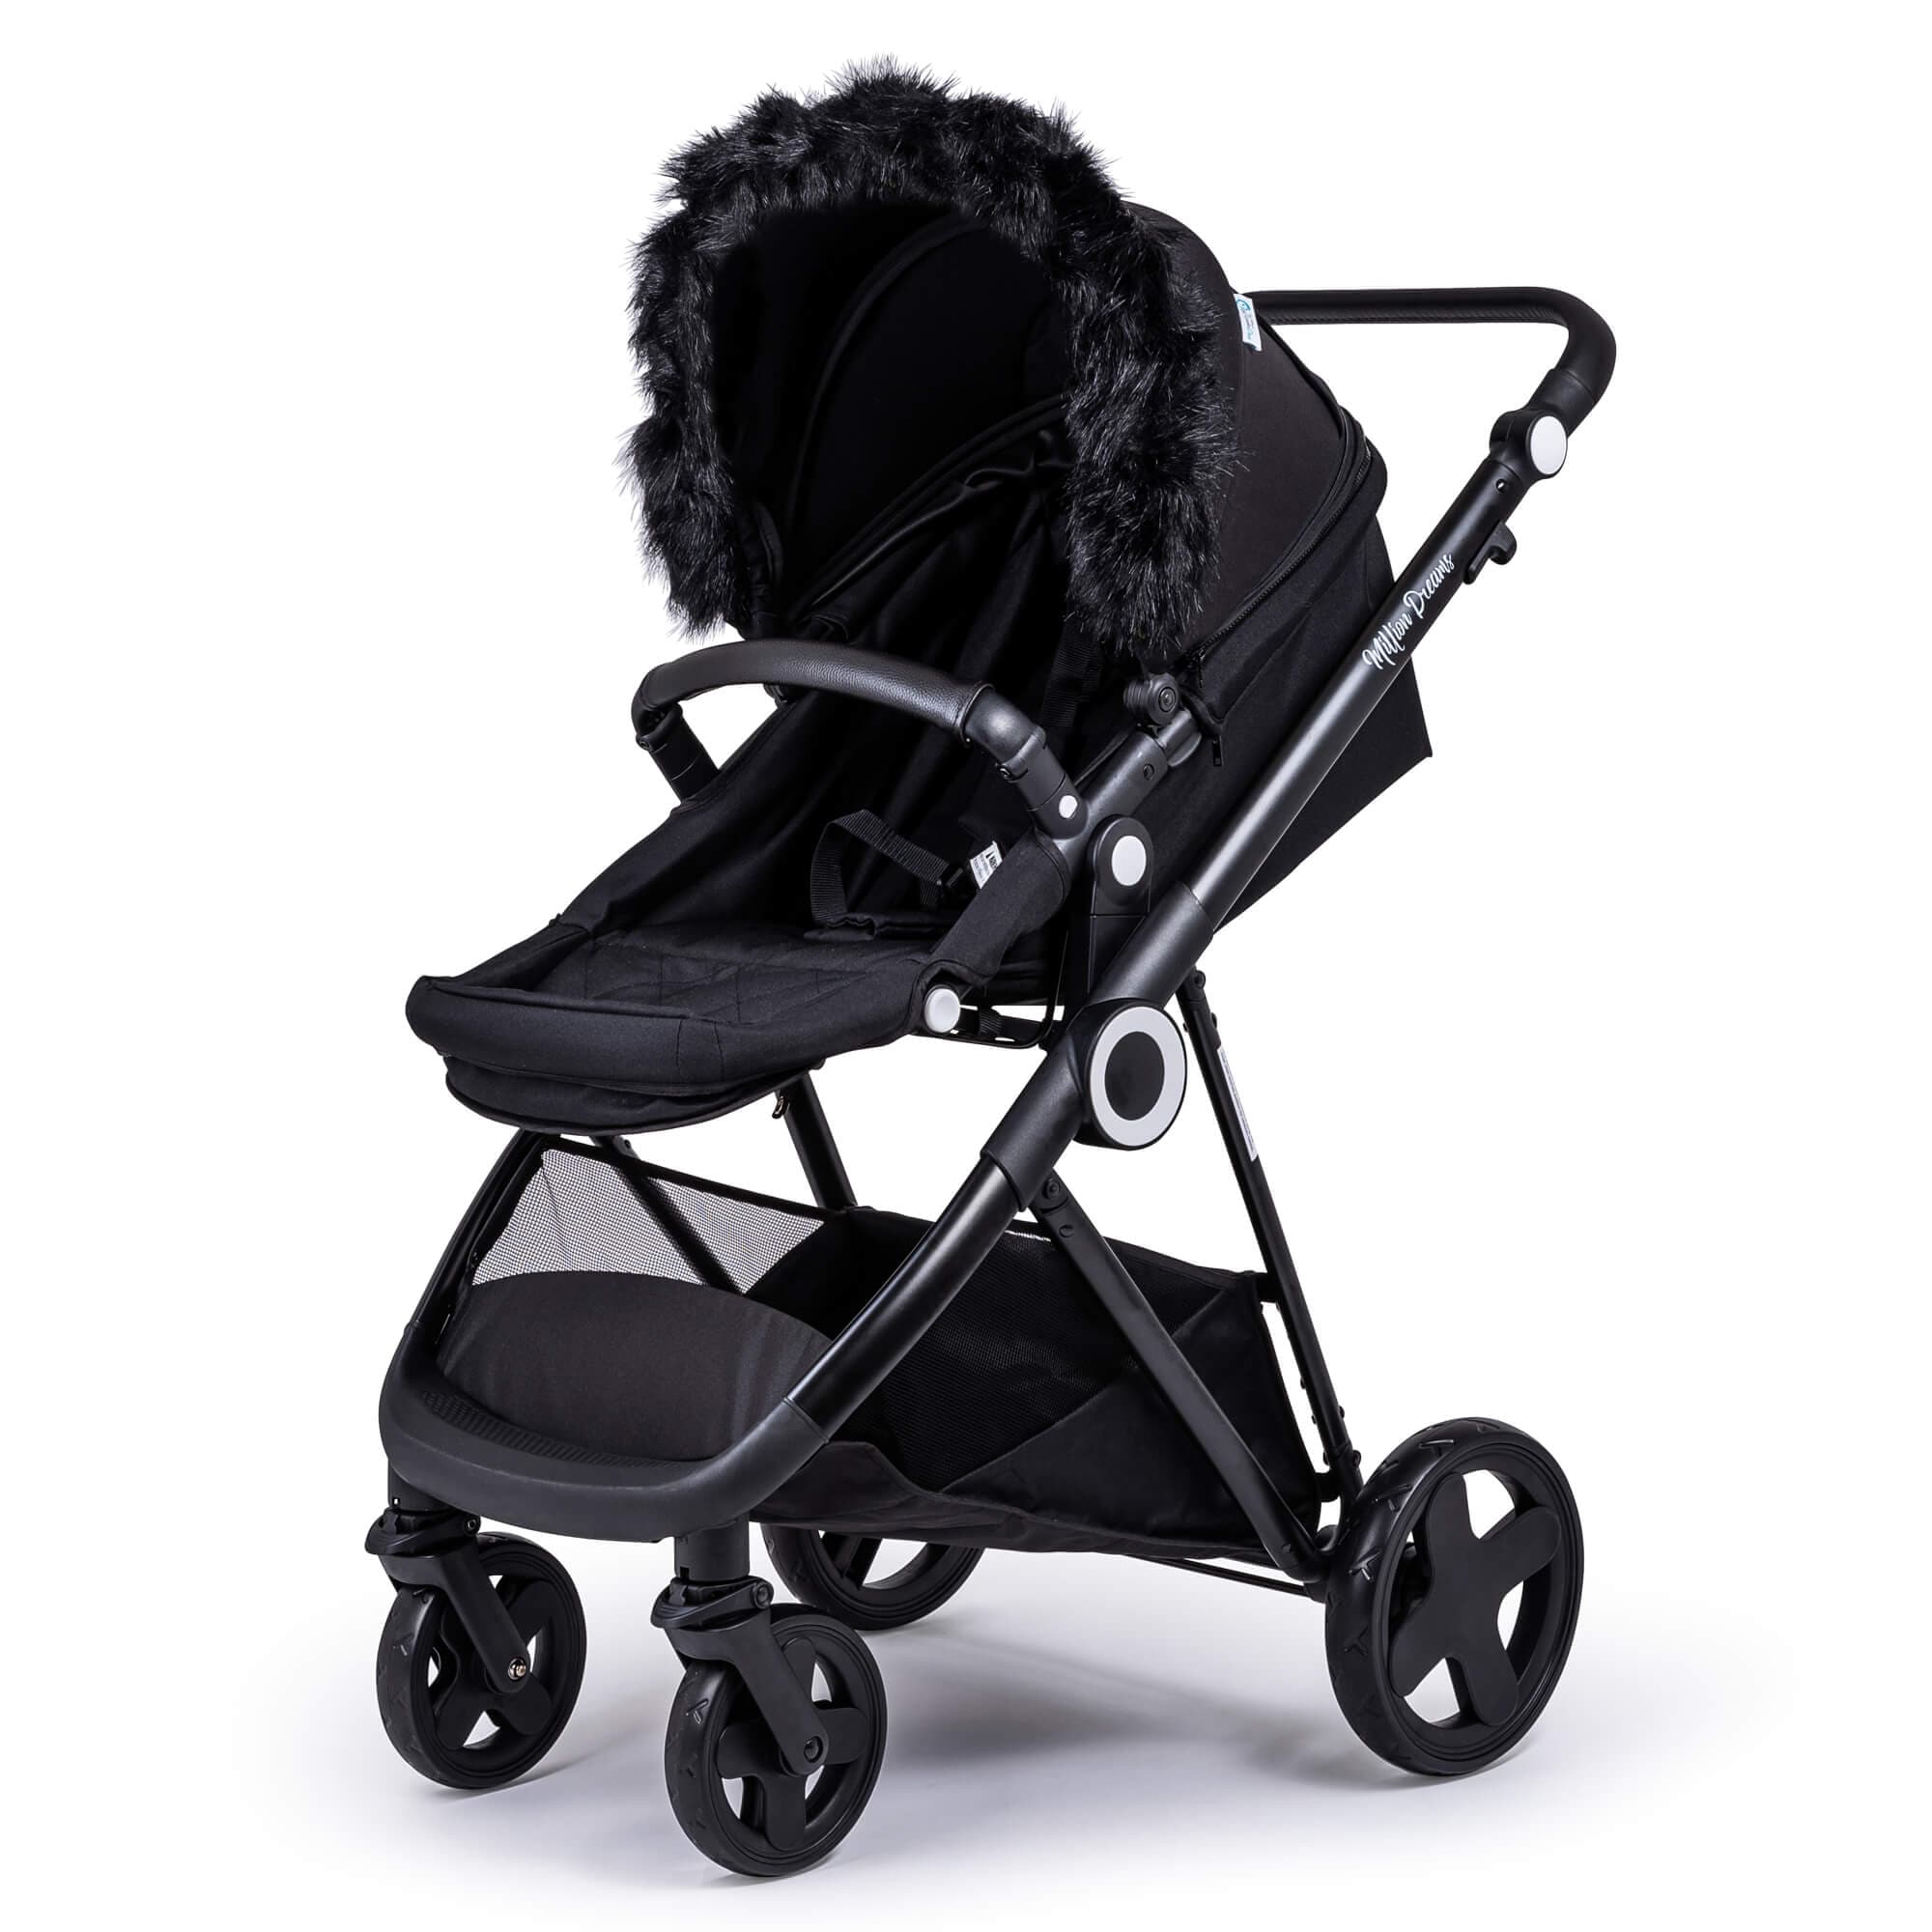 Pram Fur Hood Trim Attachment for Pushchair Compatible with Out 'n' About - Black / Fits All Models | For Your Little One